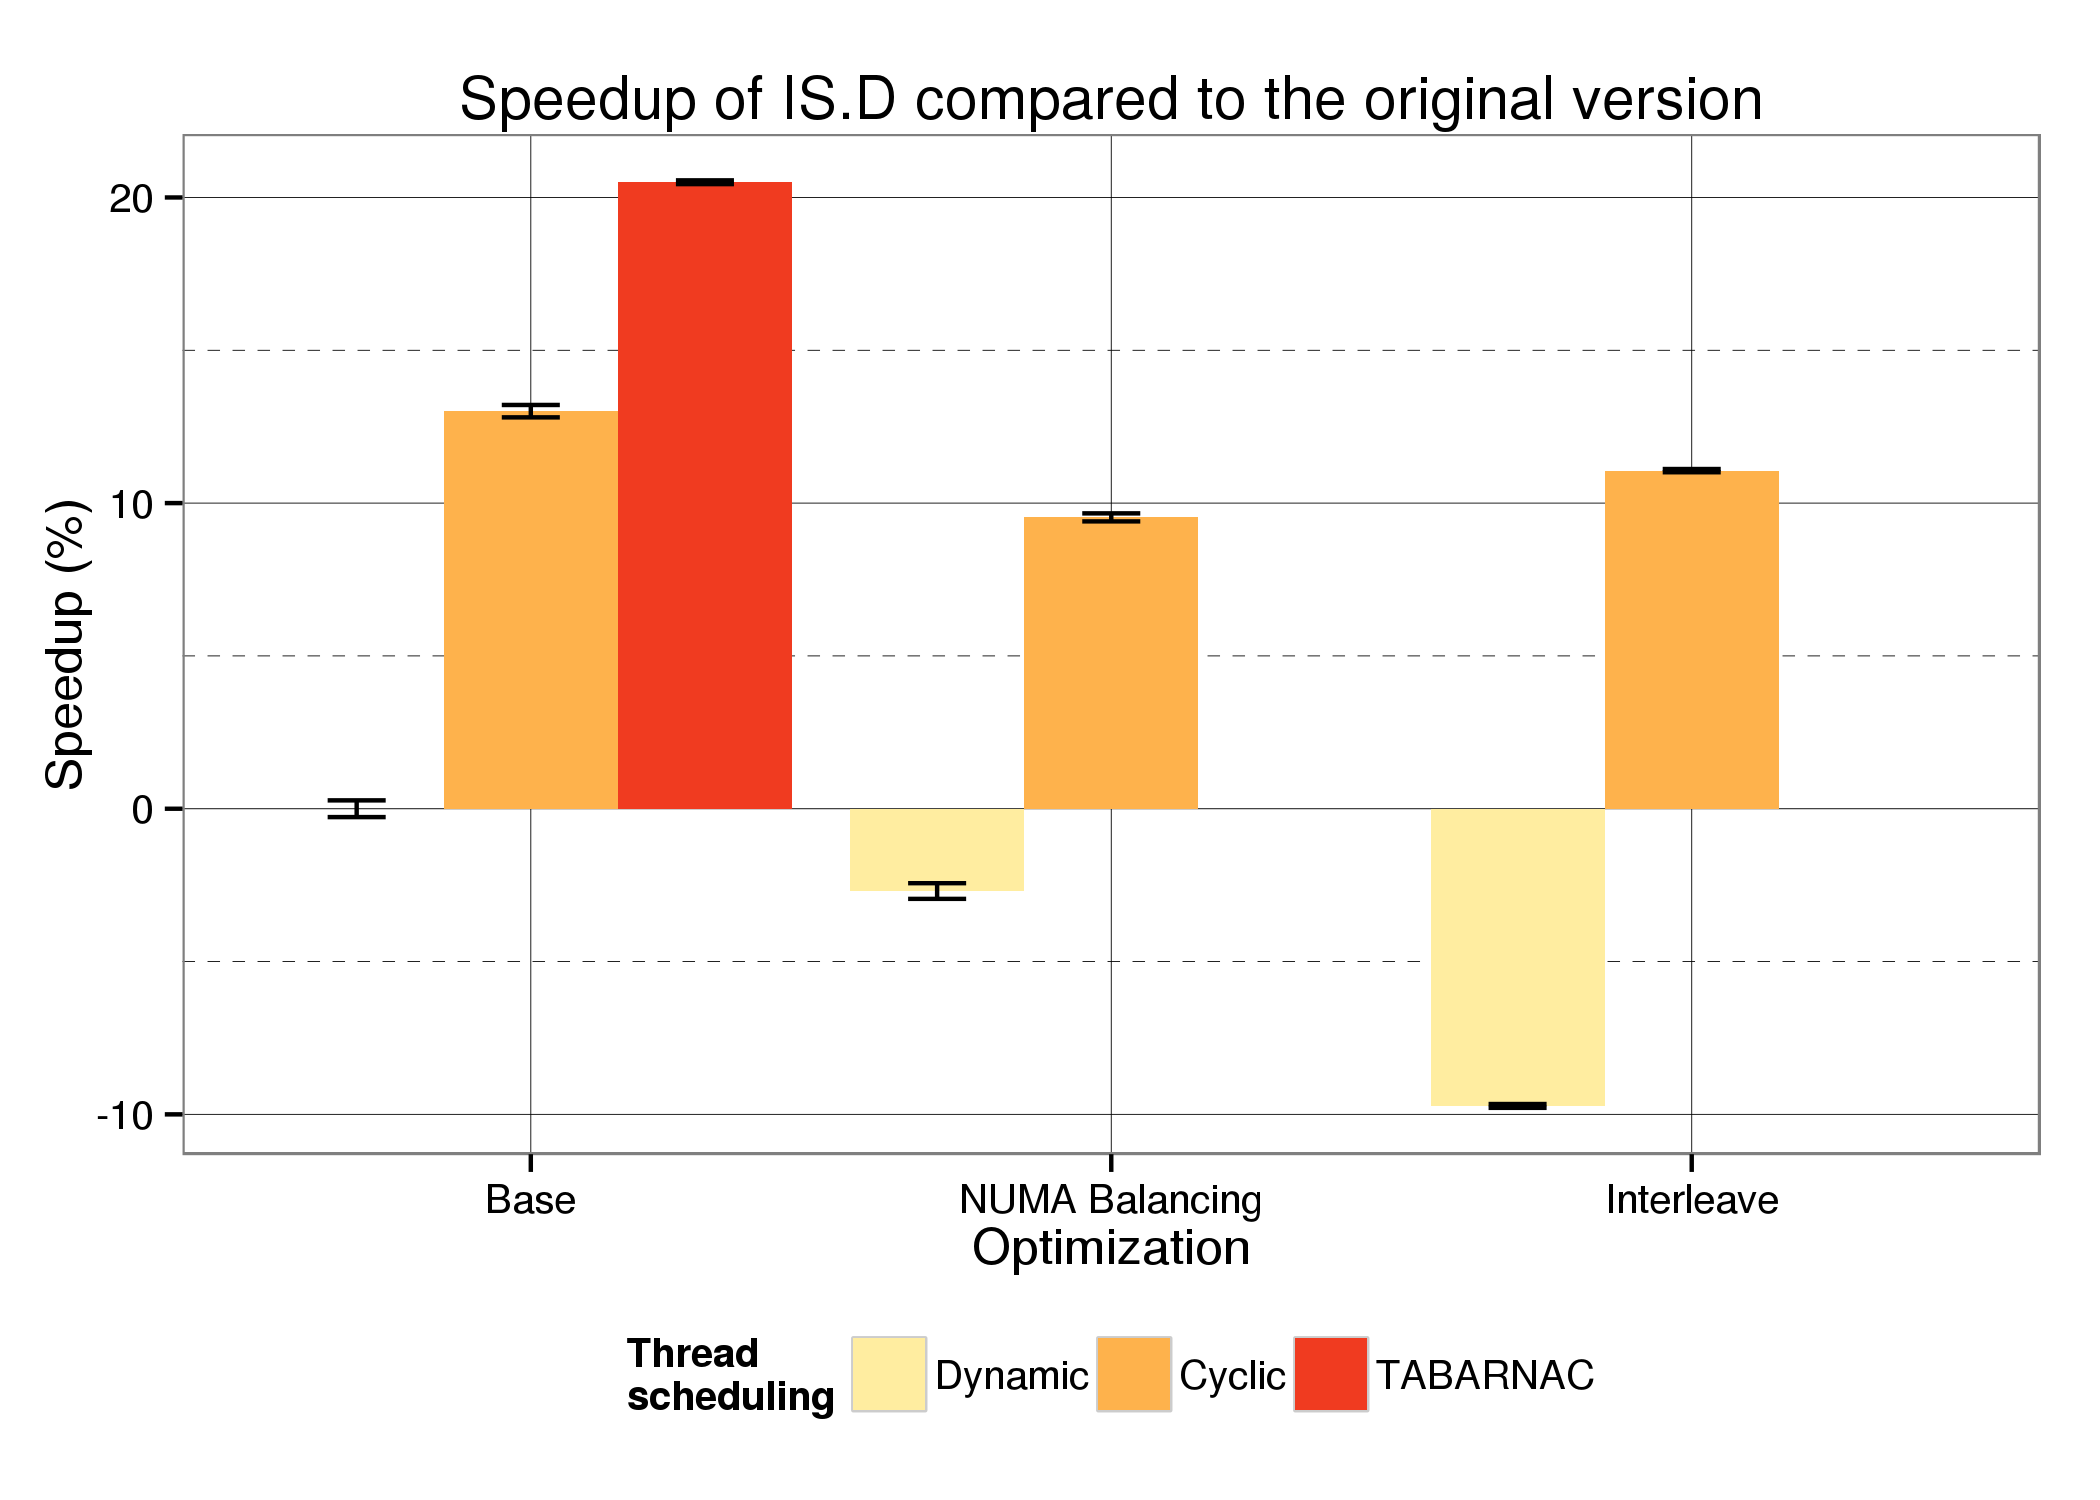 Speedup for IS compared to the baseline